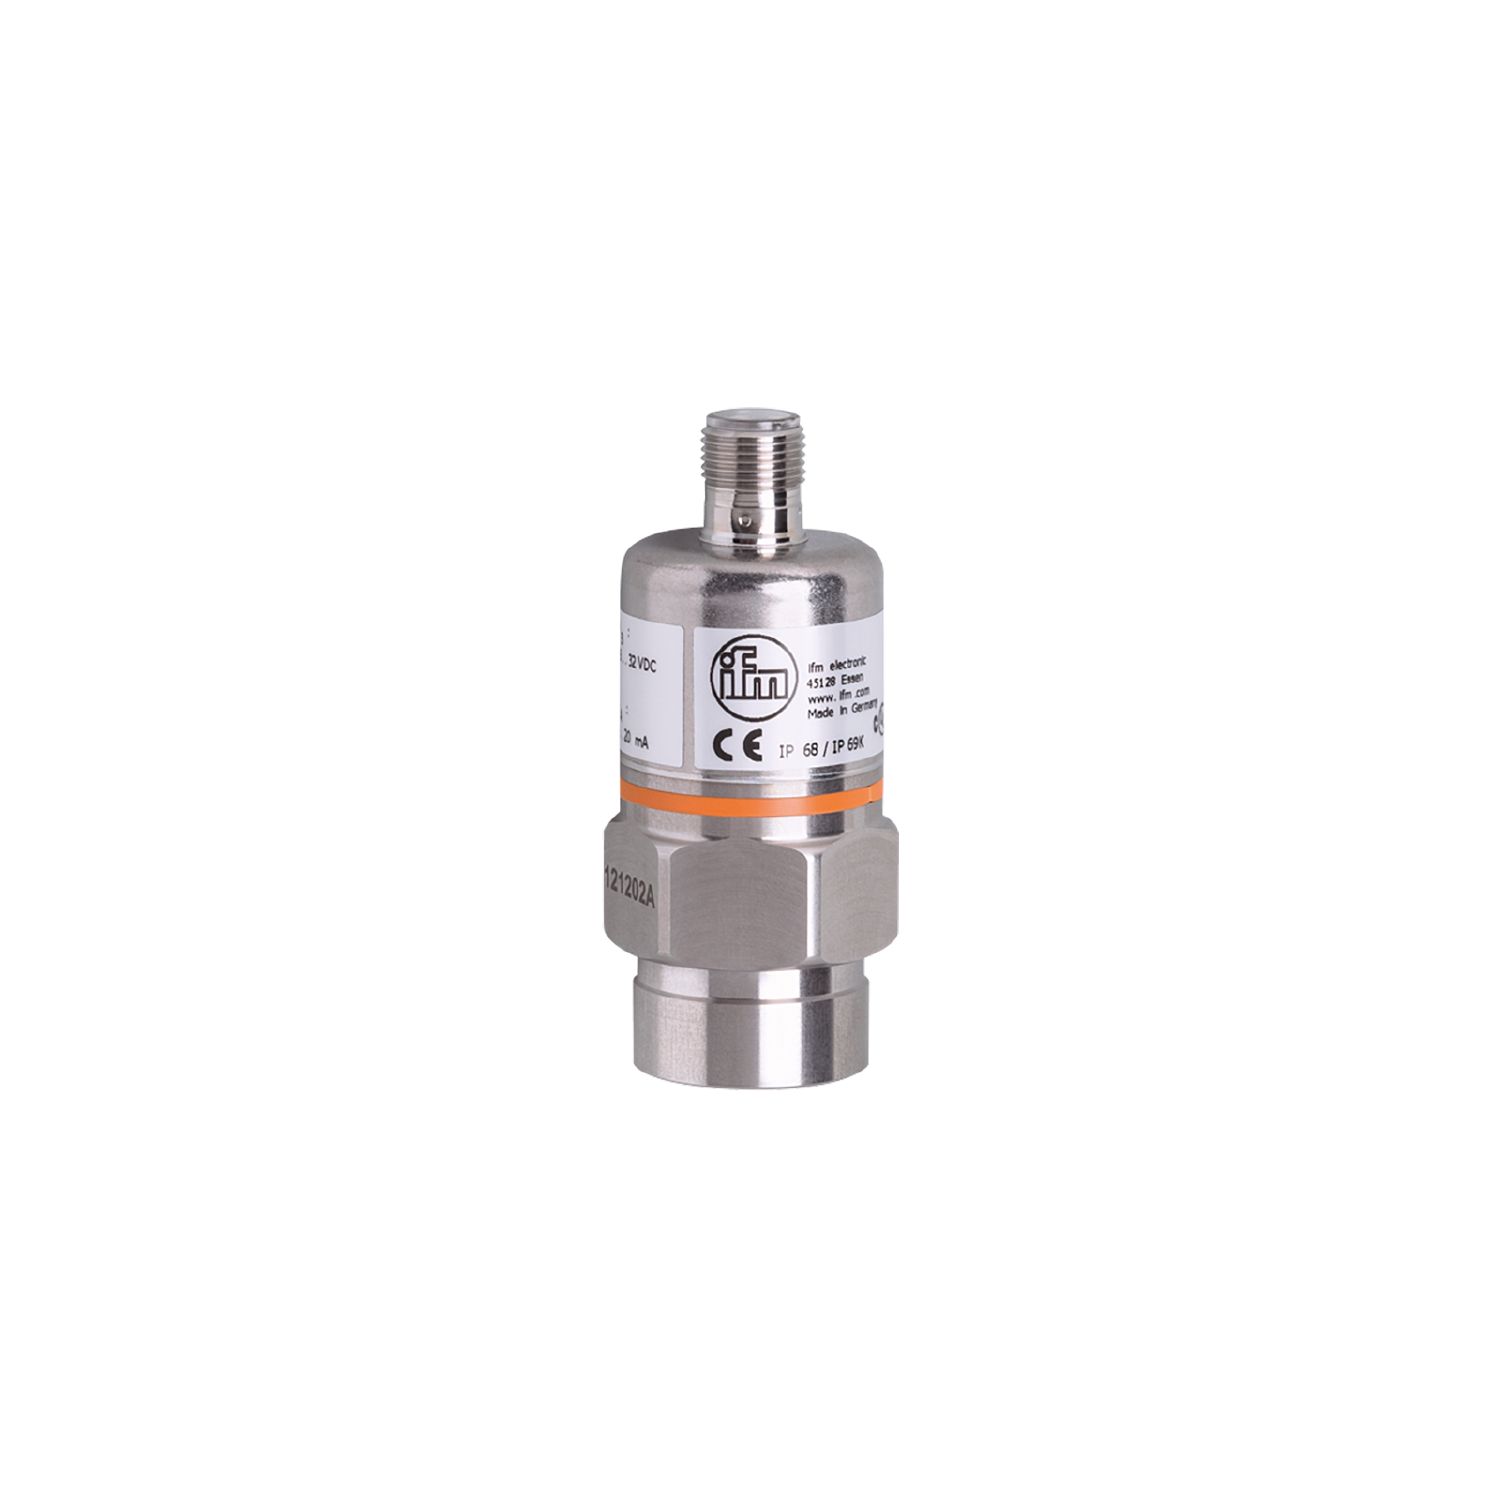 PA3022 - Pressure transmitter with ceramic measuring cell - ifm